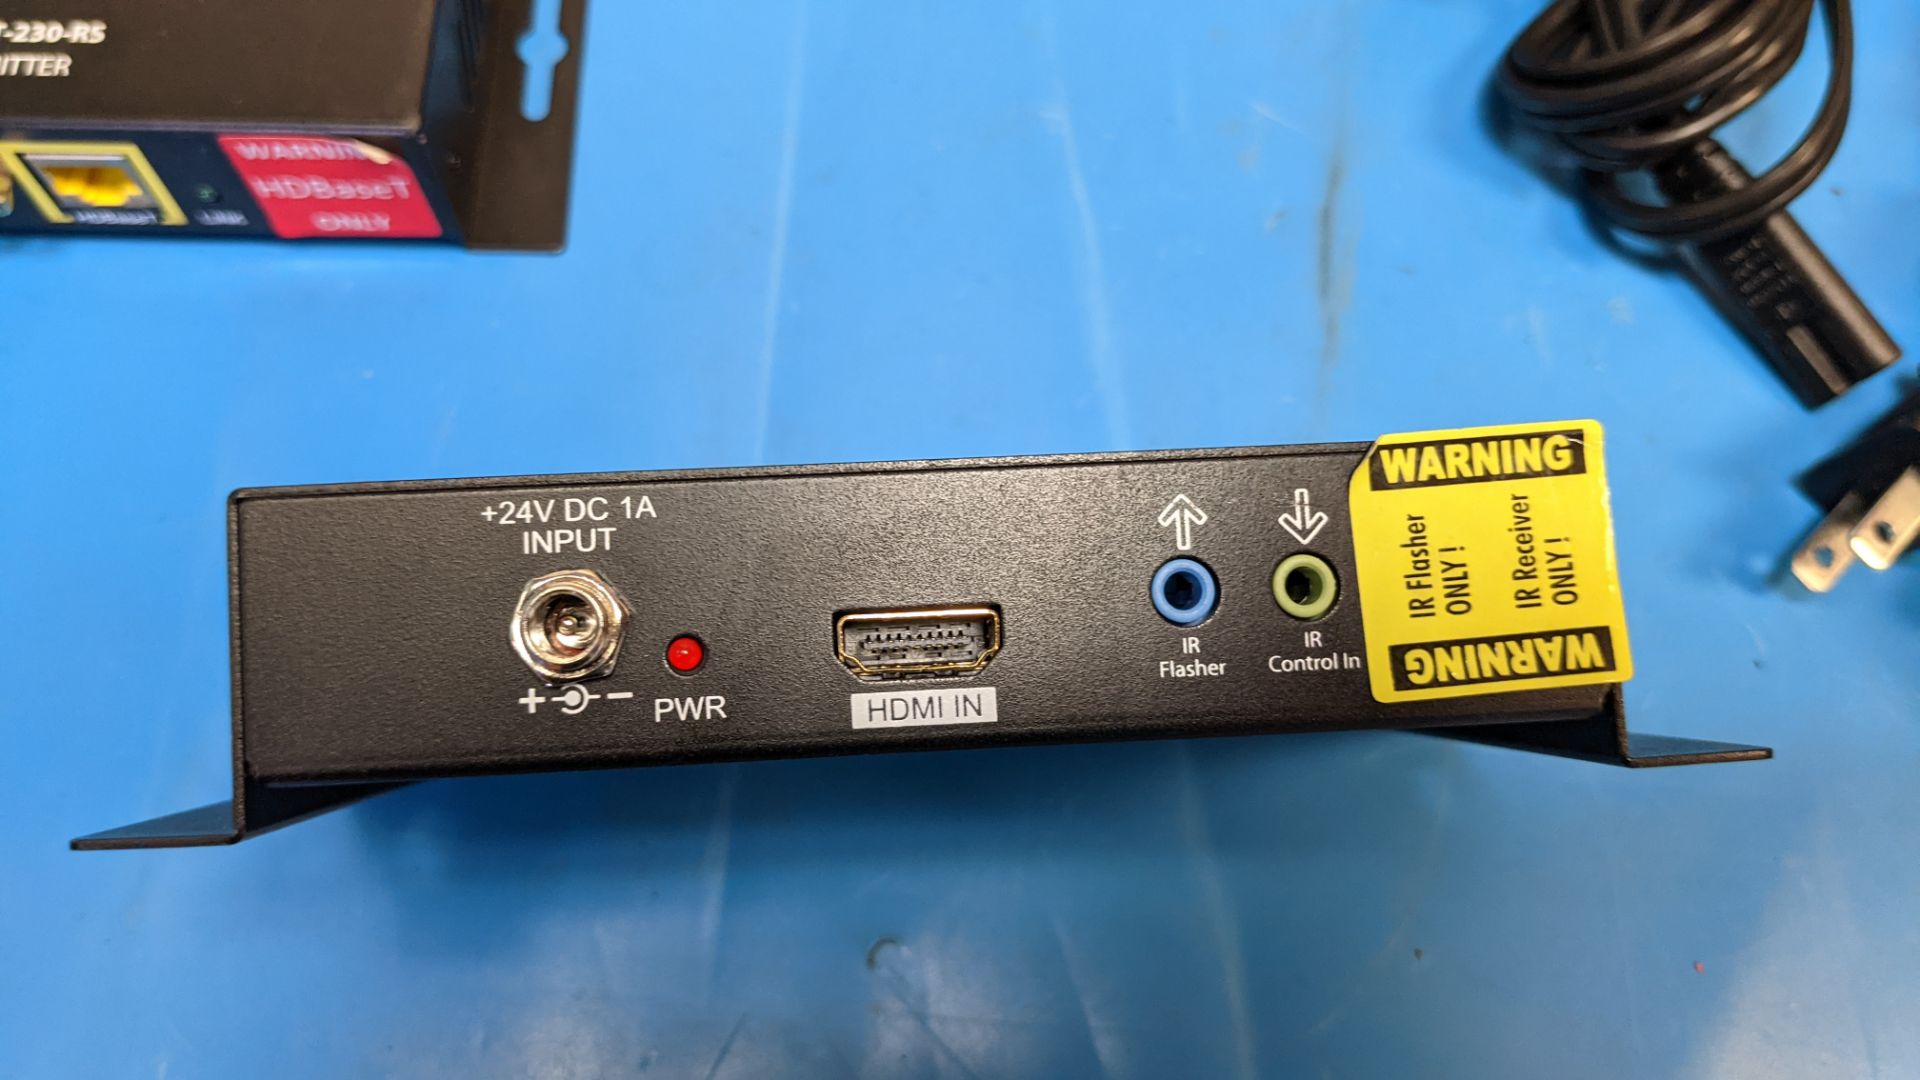 LOT OF BINARY HDMI HDBaseT EXTENDERS - Image 6 of 7